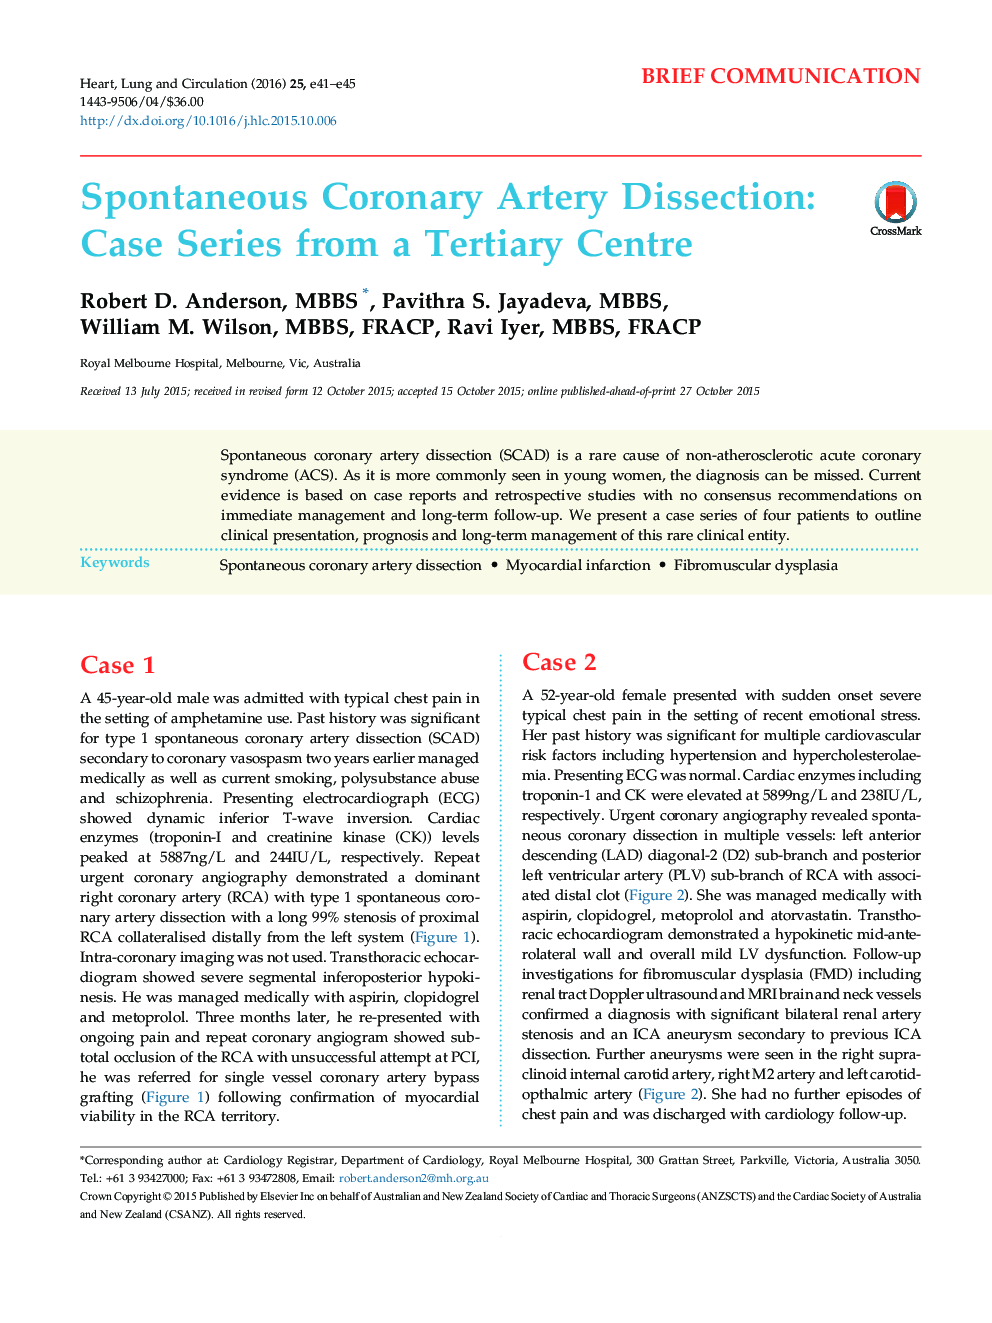 Spontaneous Coronary Artery Dissection: Case Series from a Tertiary Centre